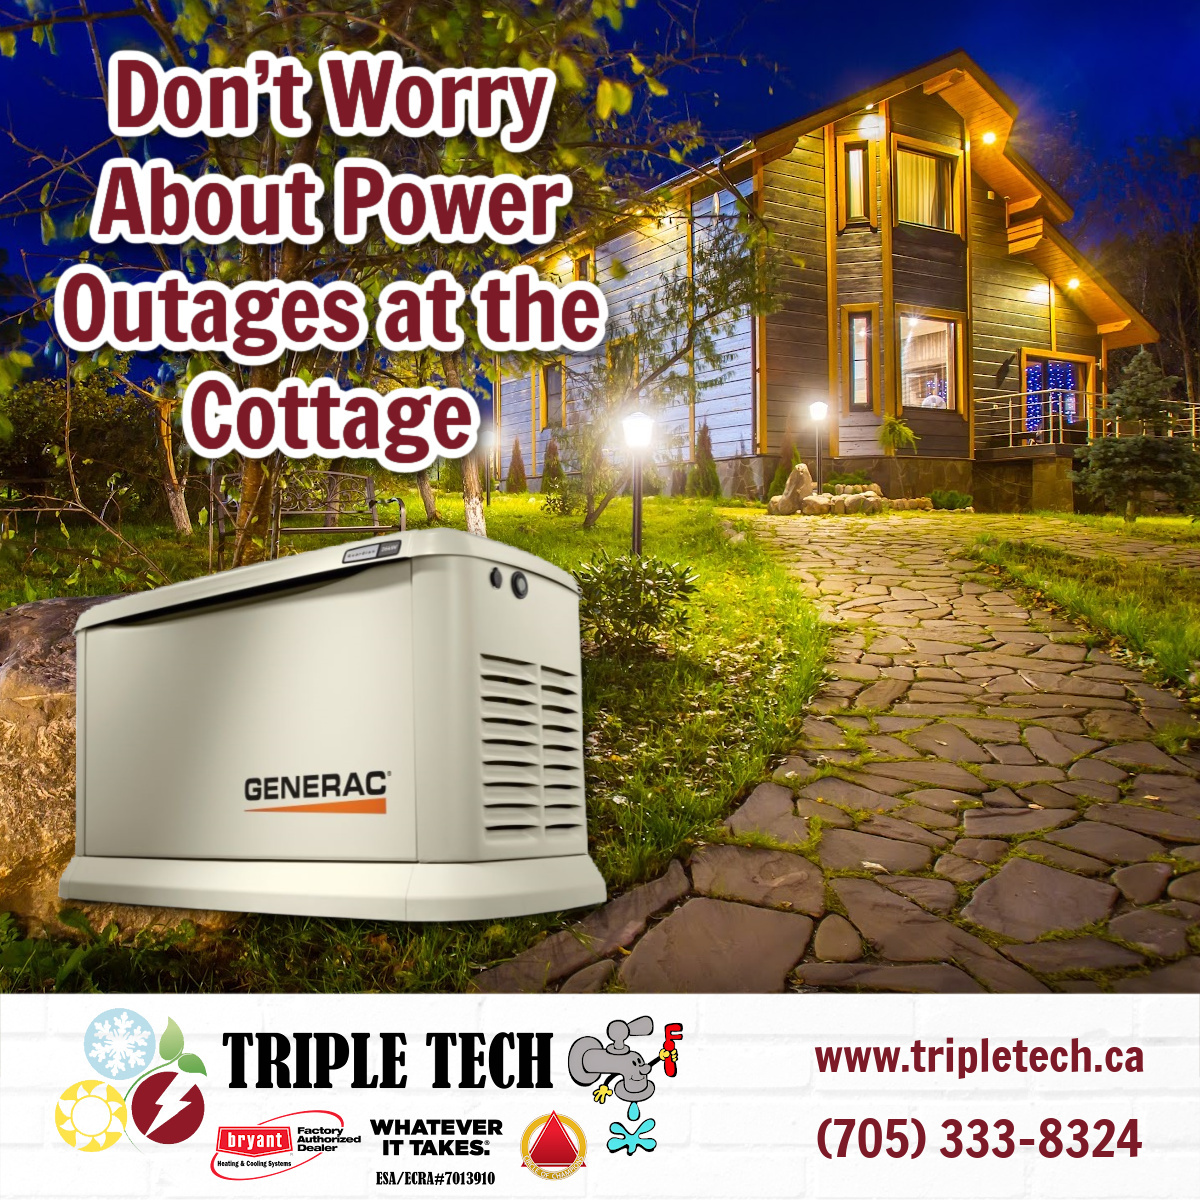 Keep your cottage, home and business secure with a Generac Generator from Triple Tech.

Find the unit that’s right for you by calling 705-333-8324.

#whateverittakes #bryantfactoryauthorizeddealer #circleofchampions #simcoecounty #georgianbay #midland #barrie #generac